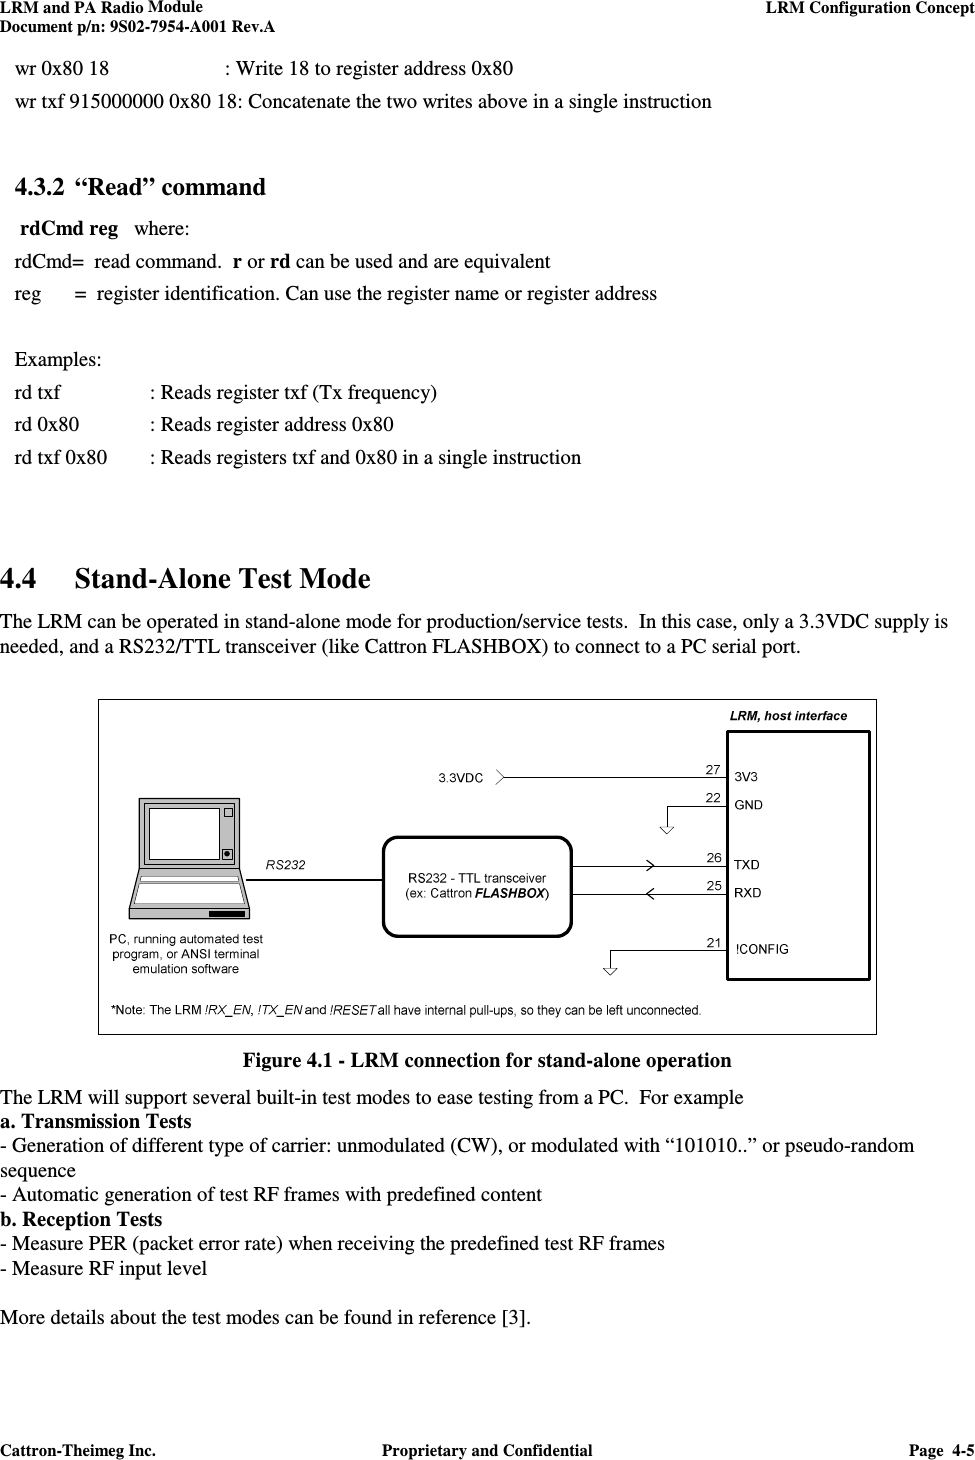 LRM and PA Radio Module    LRM Configuration Concept  Document p/n: 9S02-7954-A001 Rev.A  Cattron-Theimeg Inc.  Proprietary and Confidential  Page  4-5  wr 0x80 18    : Write 18 to register address 0x80 wr txf 915000000 0x80 18: Concatenate the two writes above in a single instruction    4.3.2 “Read” command   rdCmd reg   where: rdCmd=  read command.  r or rd can be used and are equivalent reg  =  register identification. Can use the register name or register address  Examples: rd txf    : Reads register txf (Tx frequency) rd 0x80  : Reads register address 0x80 rd txf 0x80  : Reads registers txf and 0x80 in a single instruction    4.4 Stand-Alone Test Mode  The LRM can be operated in stand-alone mode for production/service tests.  In this case, only a 3.3VDC supply is needed, and a RS232/TTL transceiver (like Cattron FLASHBOX) to connect to a PC serial port.    Figure 4.1 - LRM connection for stand-alone operation The LRM will support several built-in test modes to ease testing from a PC.  For example  a. Transmission Tests  - Generation of different type of carrier: unmodulated (CW), or modulated with “101010..” or pseudo-random sequence - Automatic generation of test RF frames with predefined content b. Reception Tests - Measure PER (packet error rate) when receiving the predefined test RF frames - Measure RF input level  More details about the test modes can be found in reference [3]. 